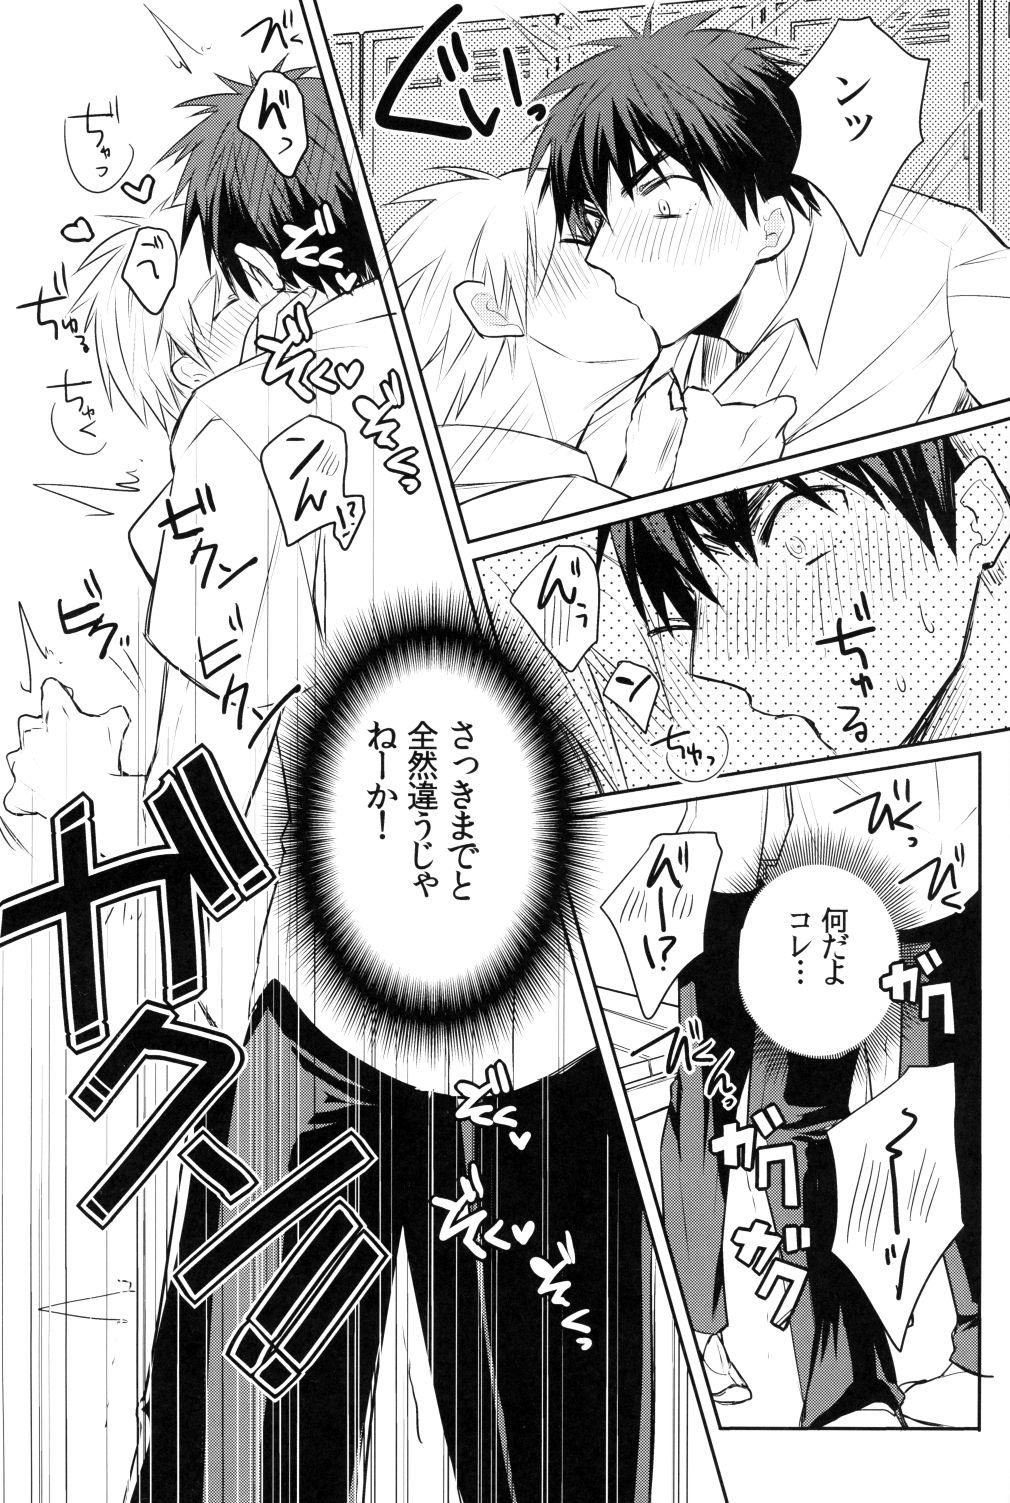 Kagami-kun's Thing is Amazing!! 16